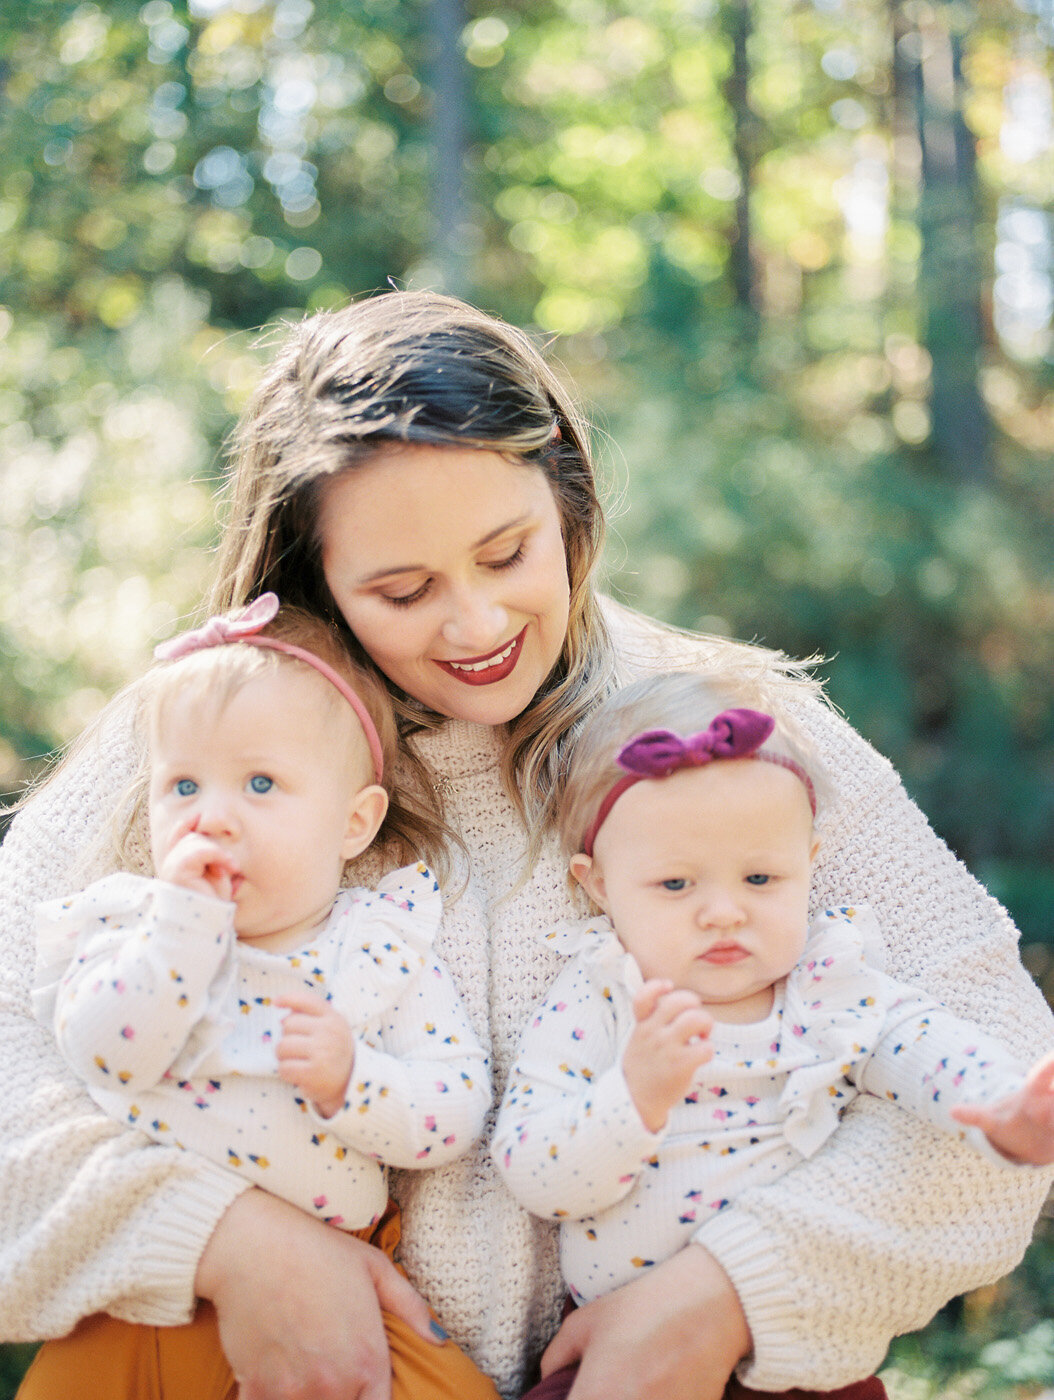 Raleigh Family Photographer | Jessica Agee Photography - 045